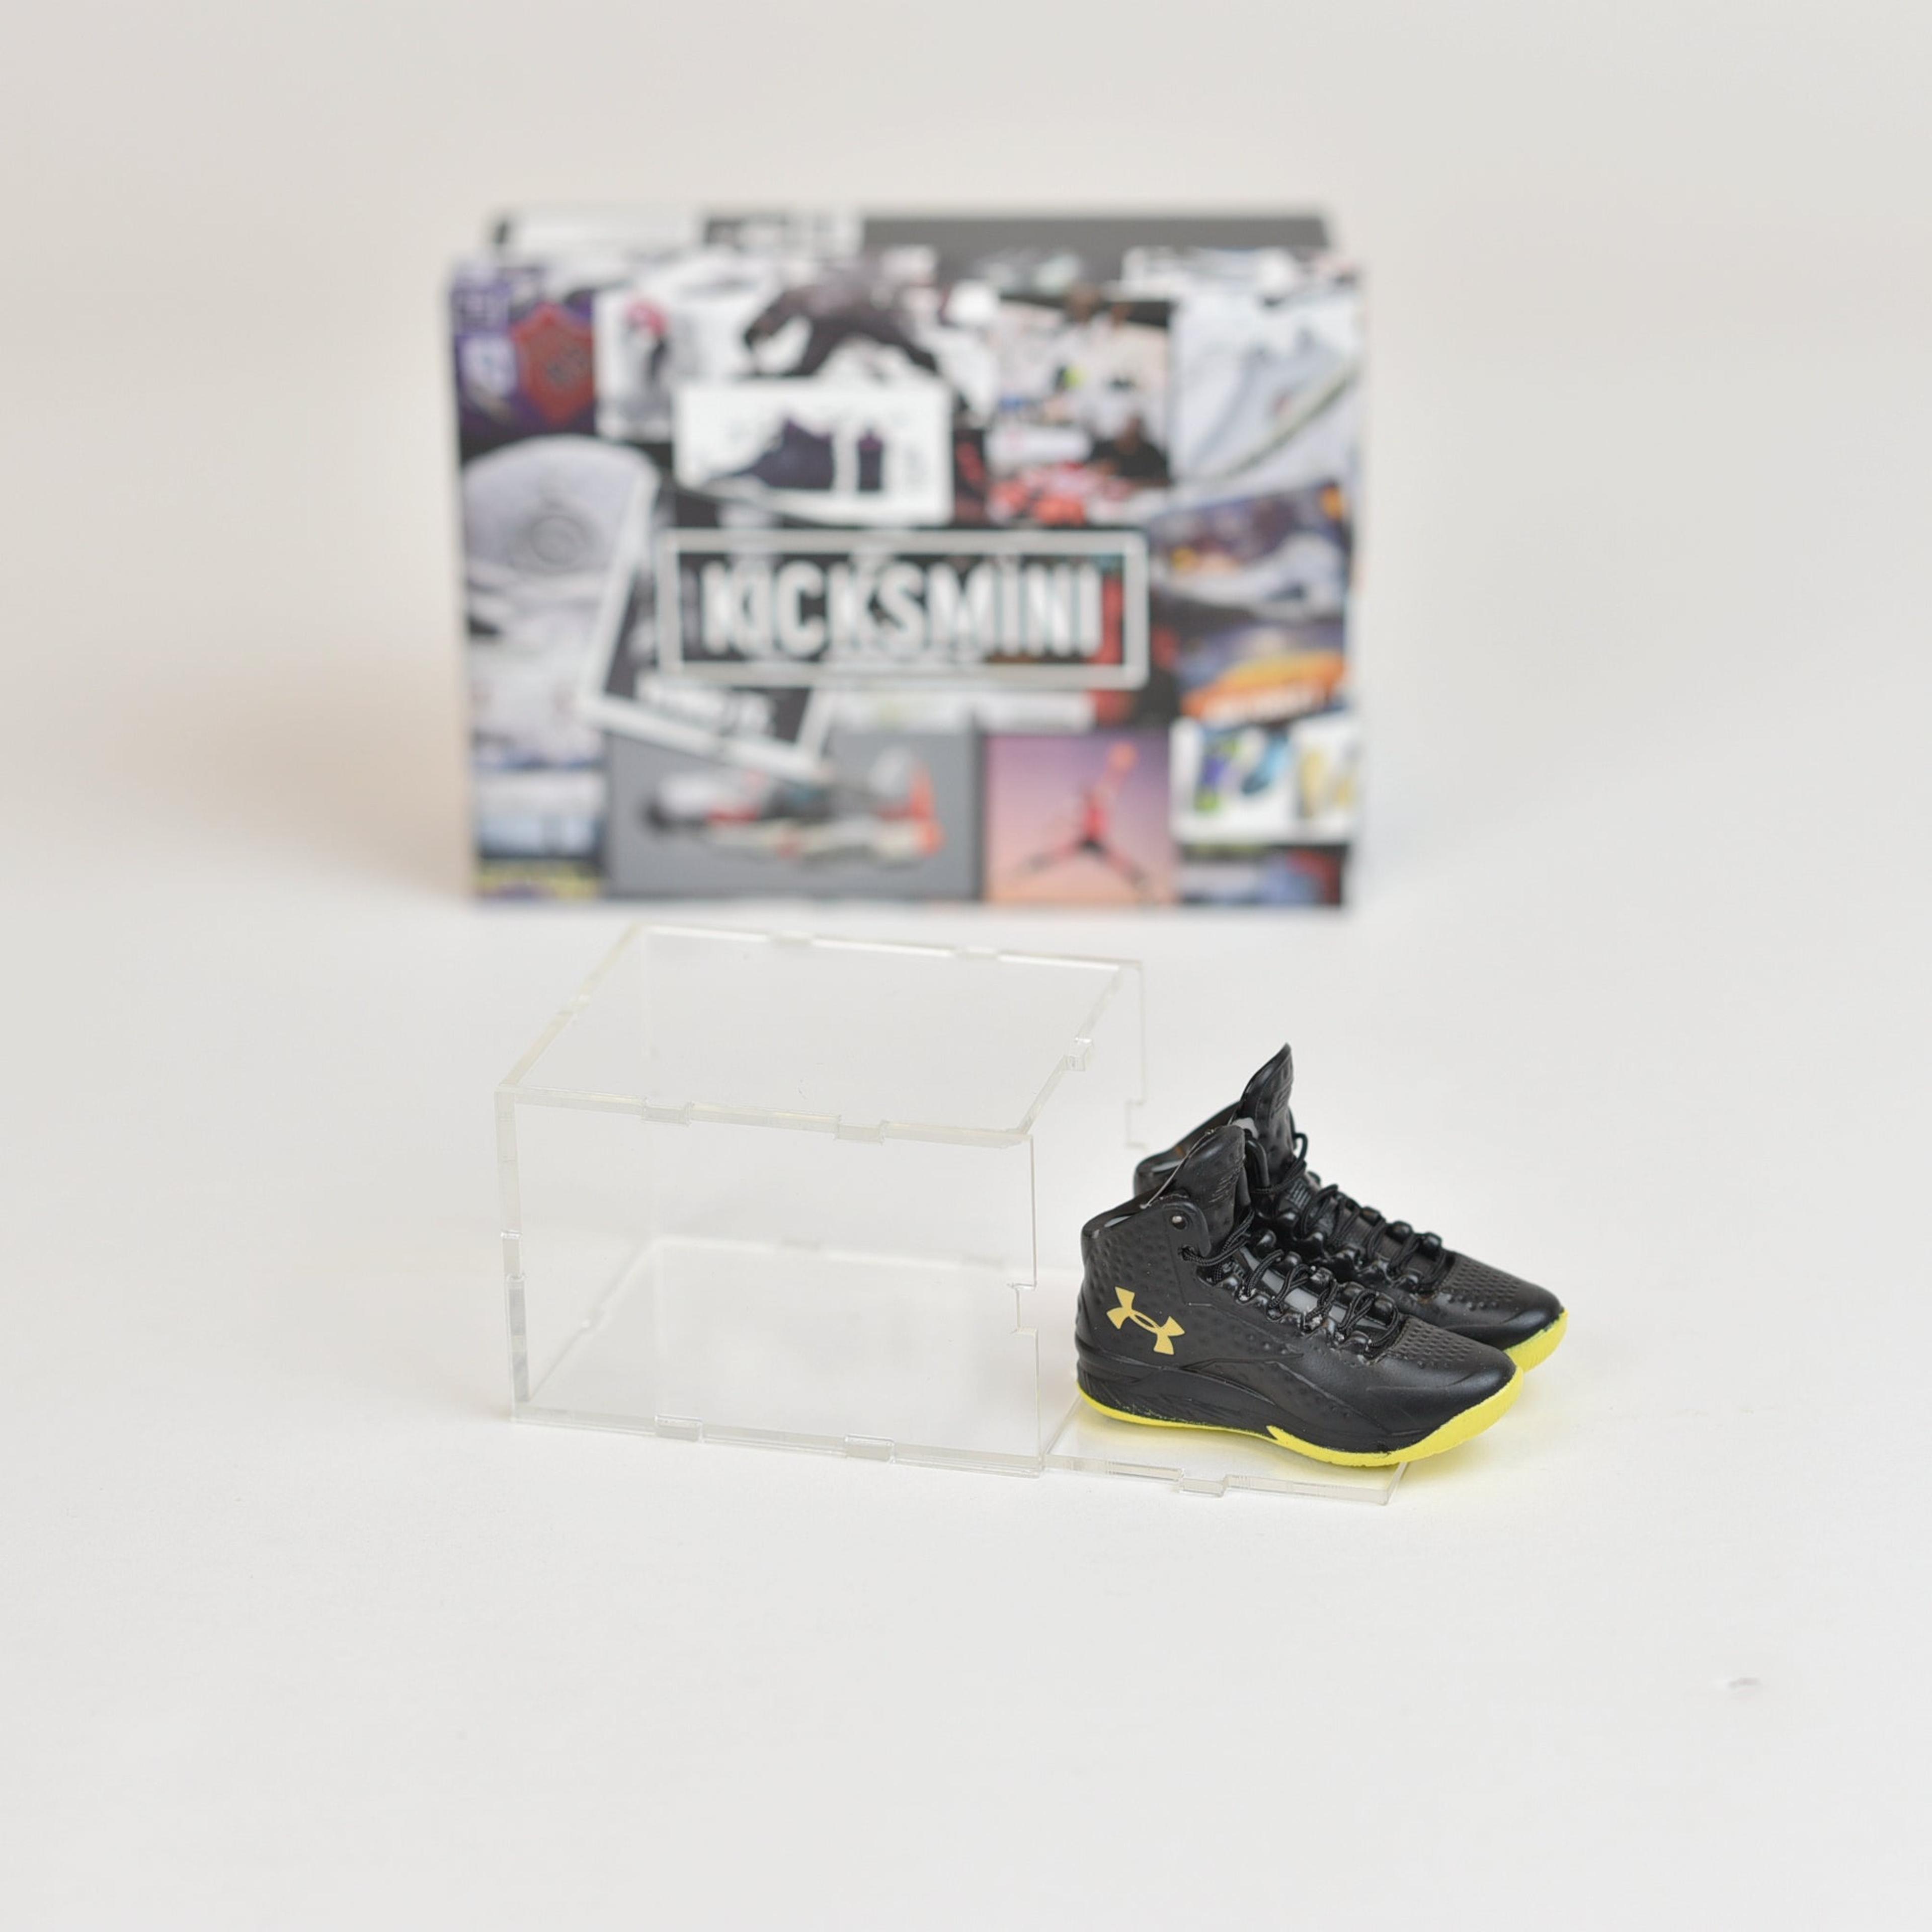 Alternate View 22 of Kobe Bryant/LeBron James/Steph Curry Mini Sneaker Collection wit